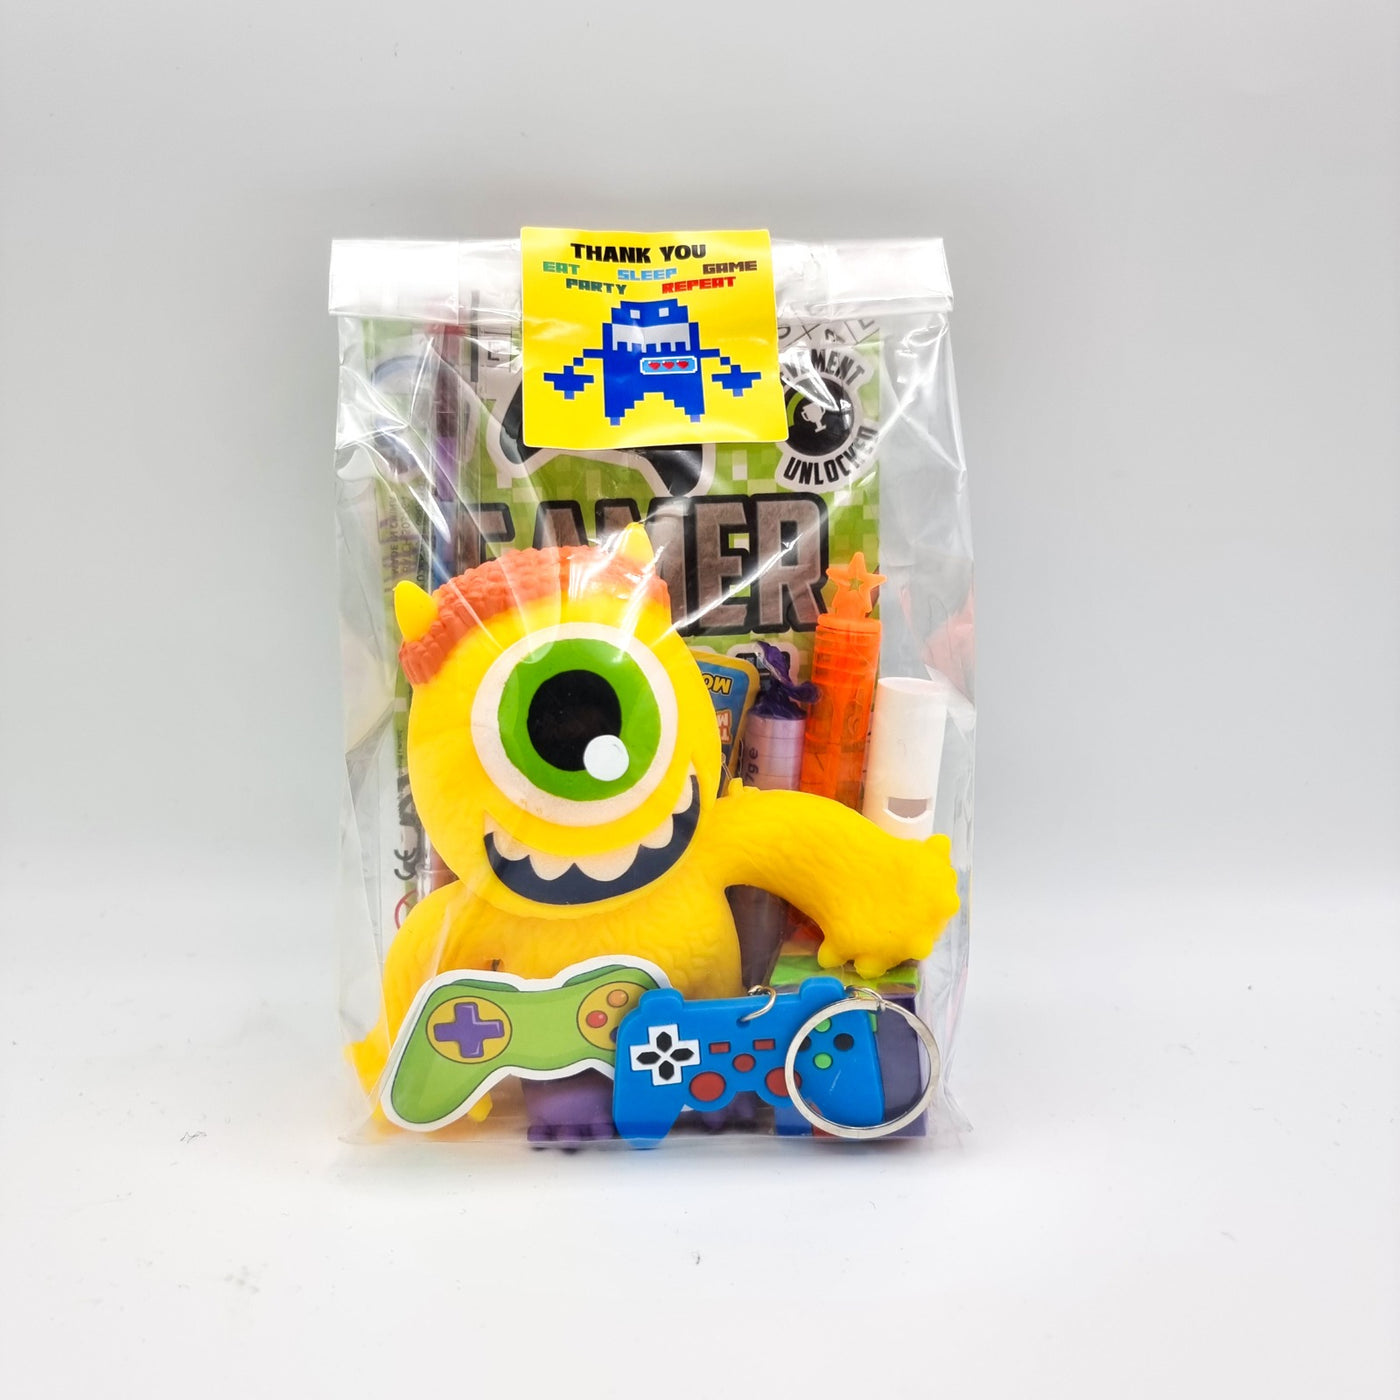 Pre Filled 'Monster Quest' Children Birthday Gamer Party Goody Bags With Toys And Sweets, Party Favours For Boys And Girls.